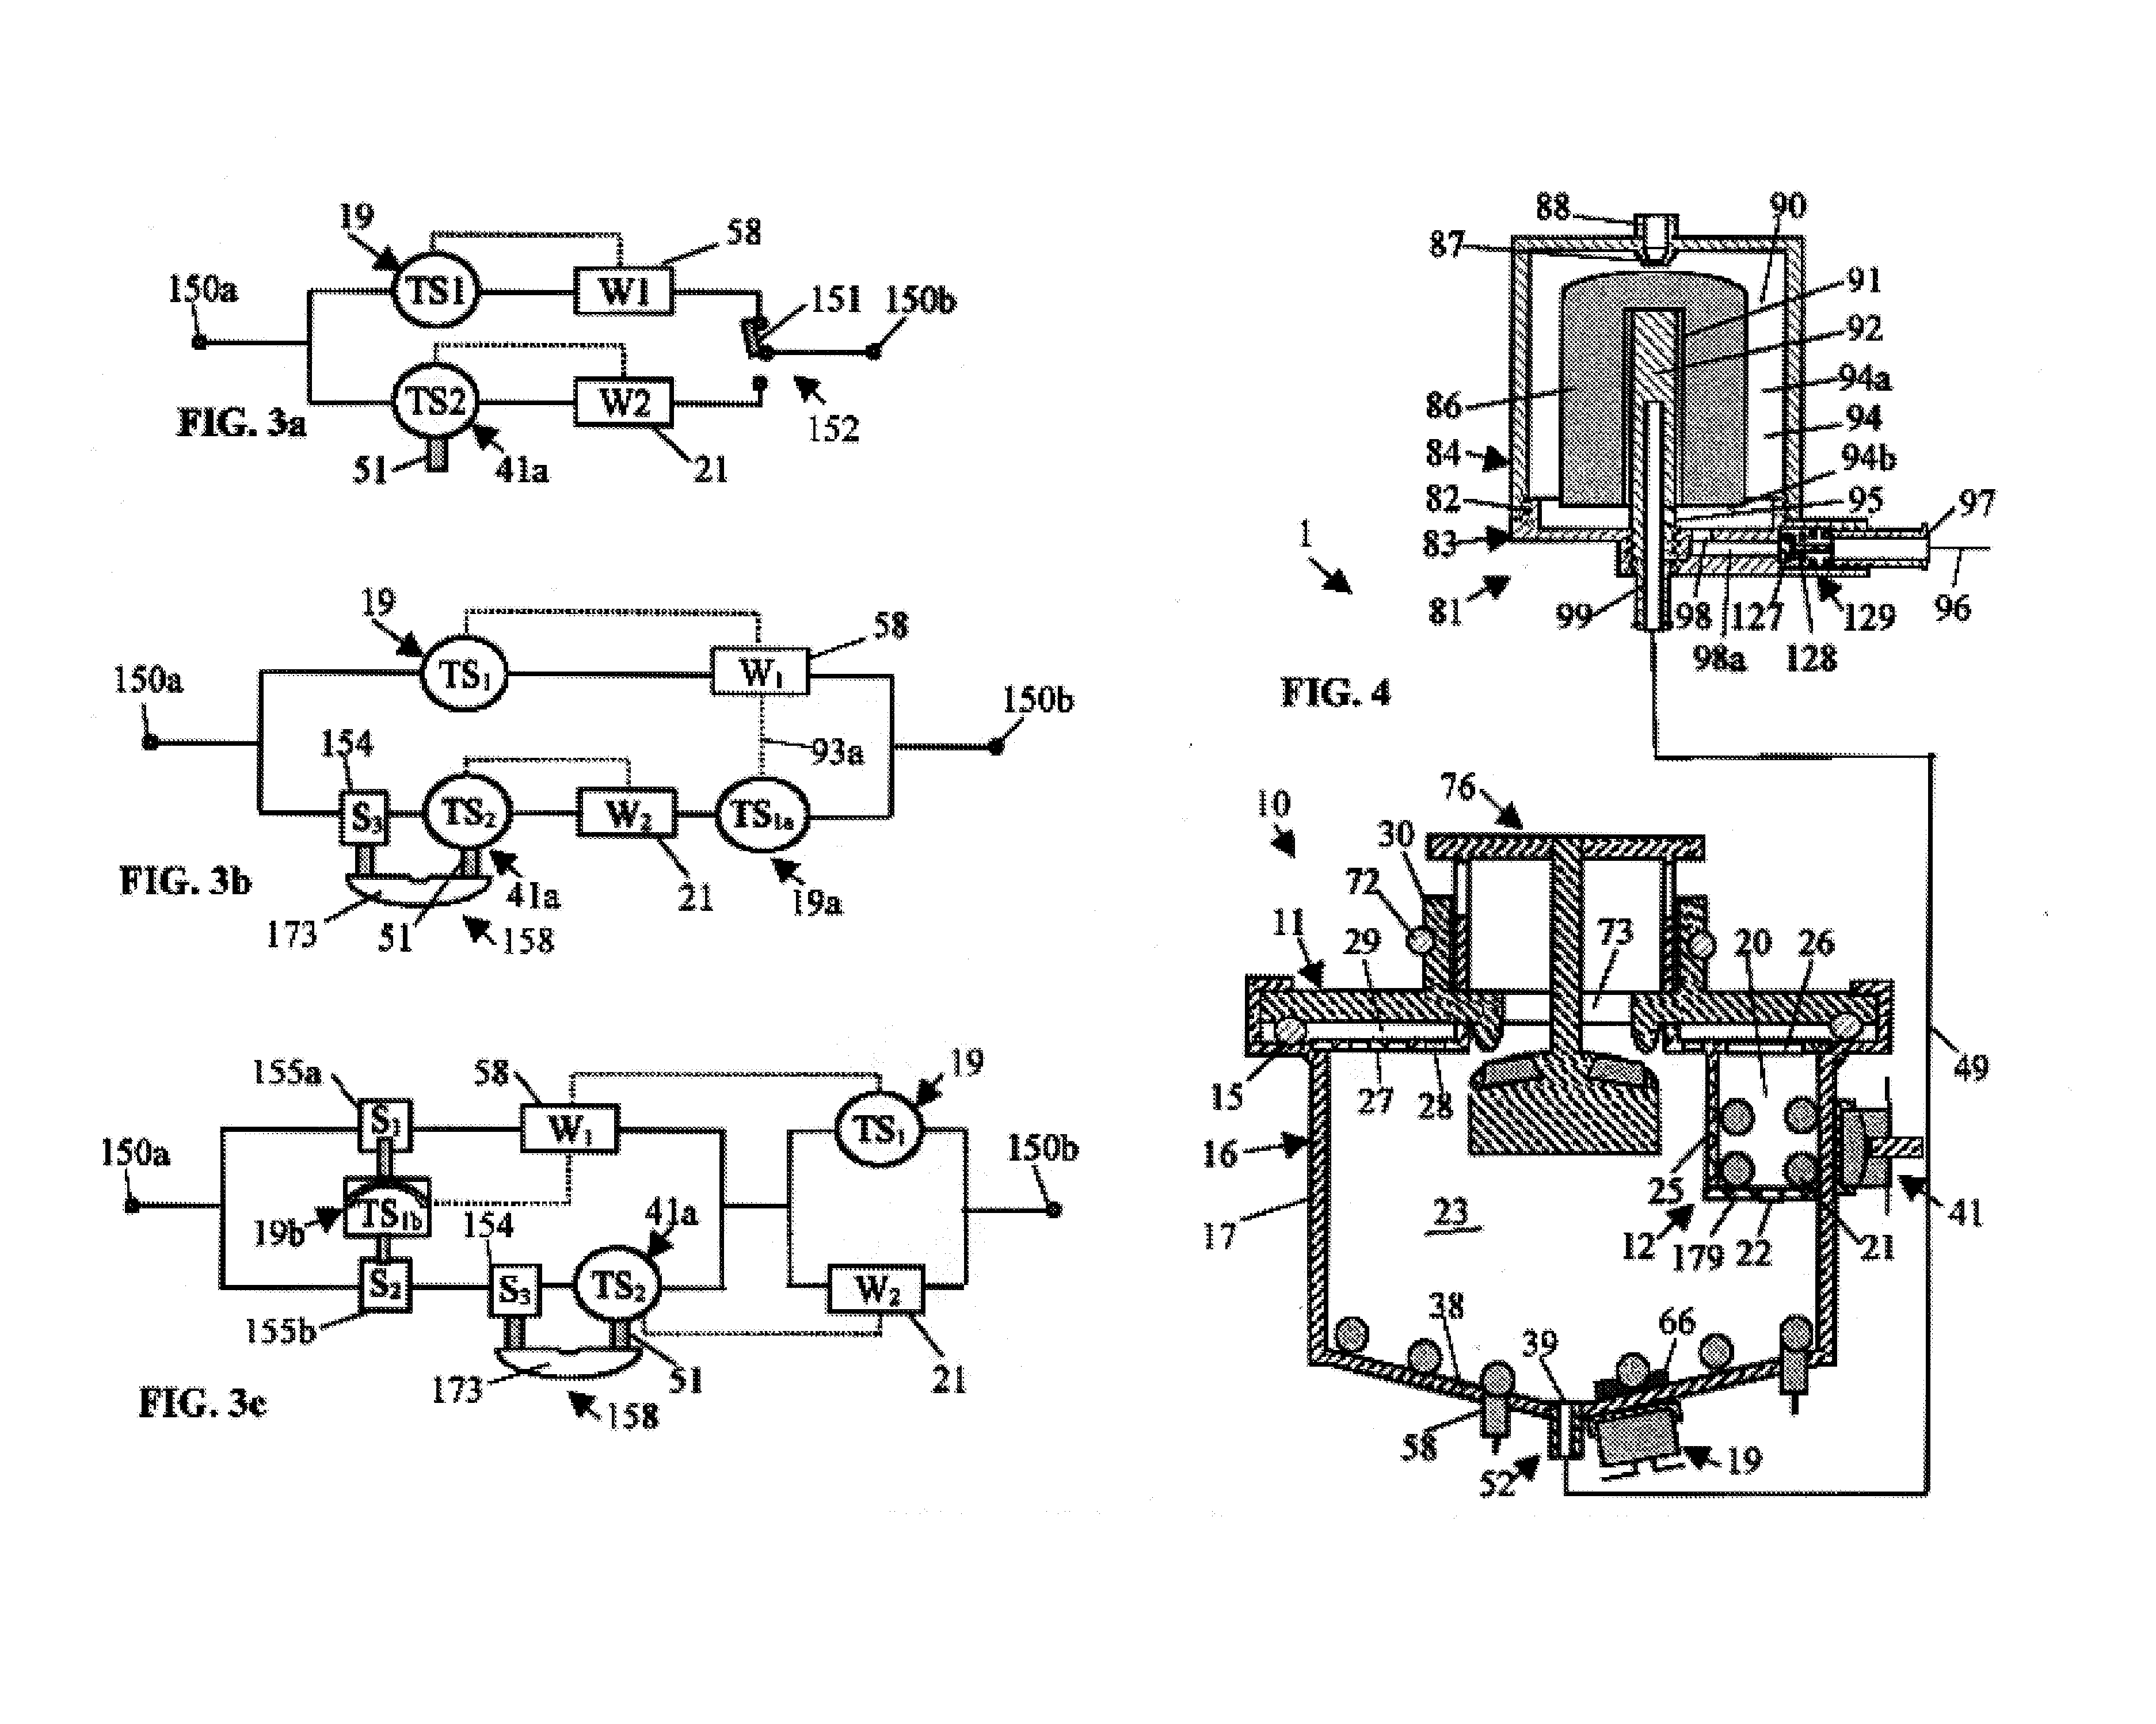 Fluid delivery system for generating pressurized hot water pulses